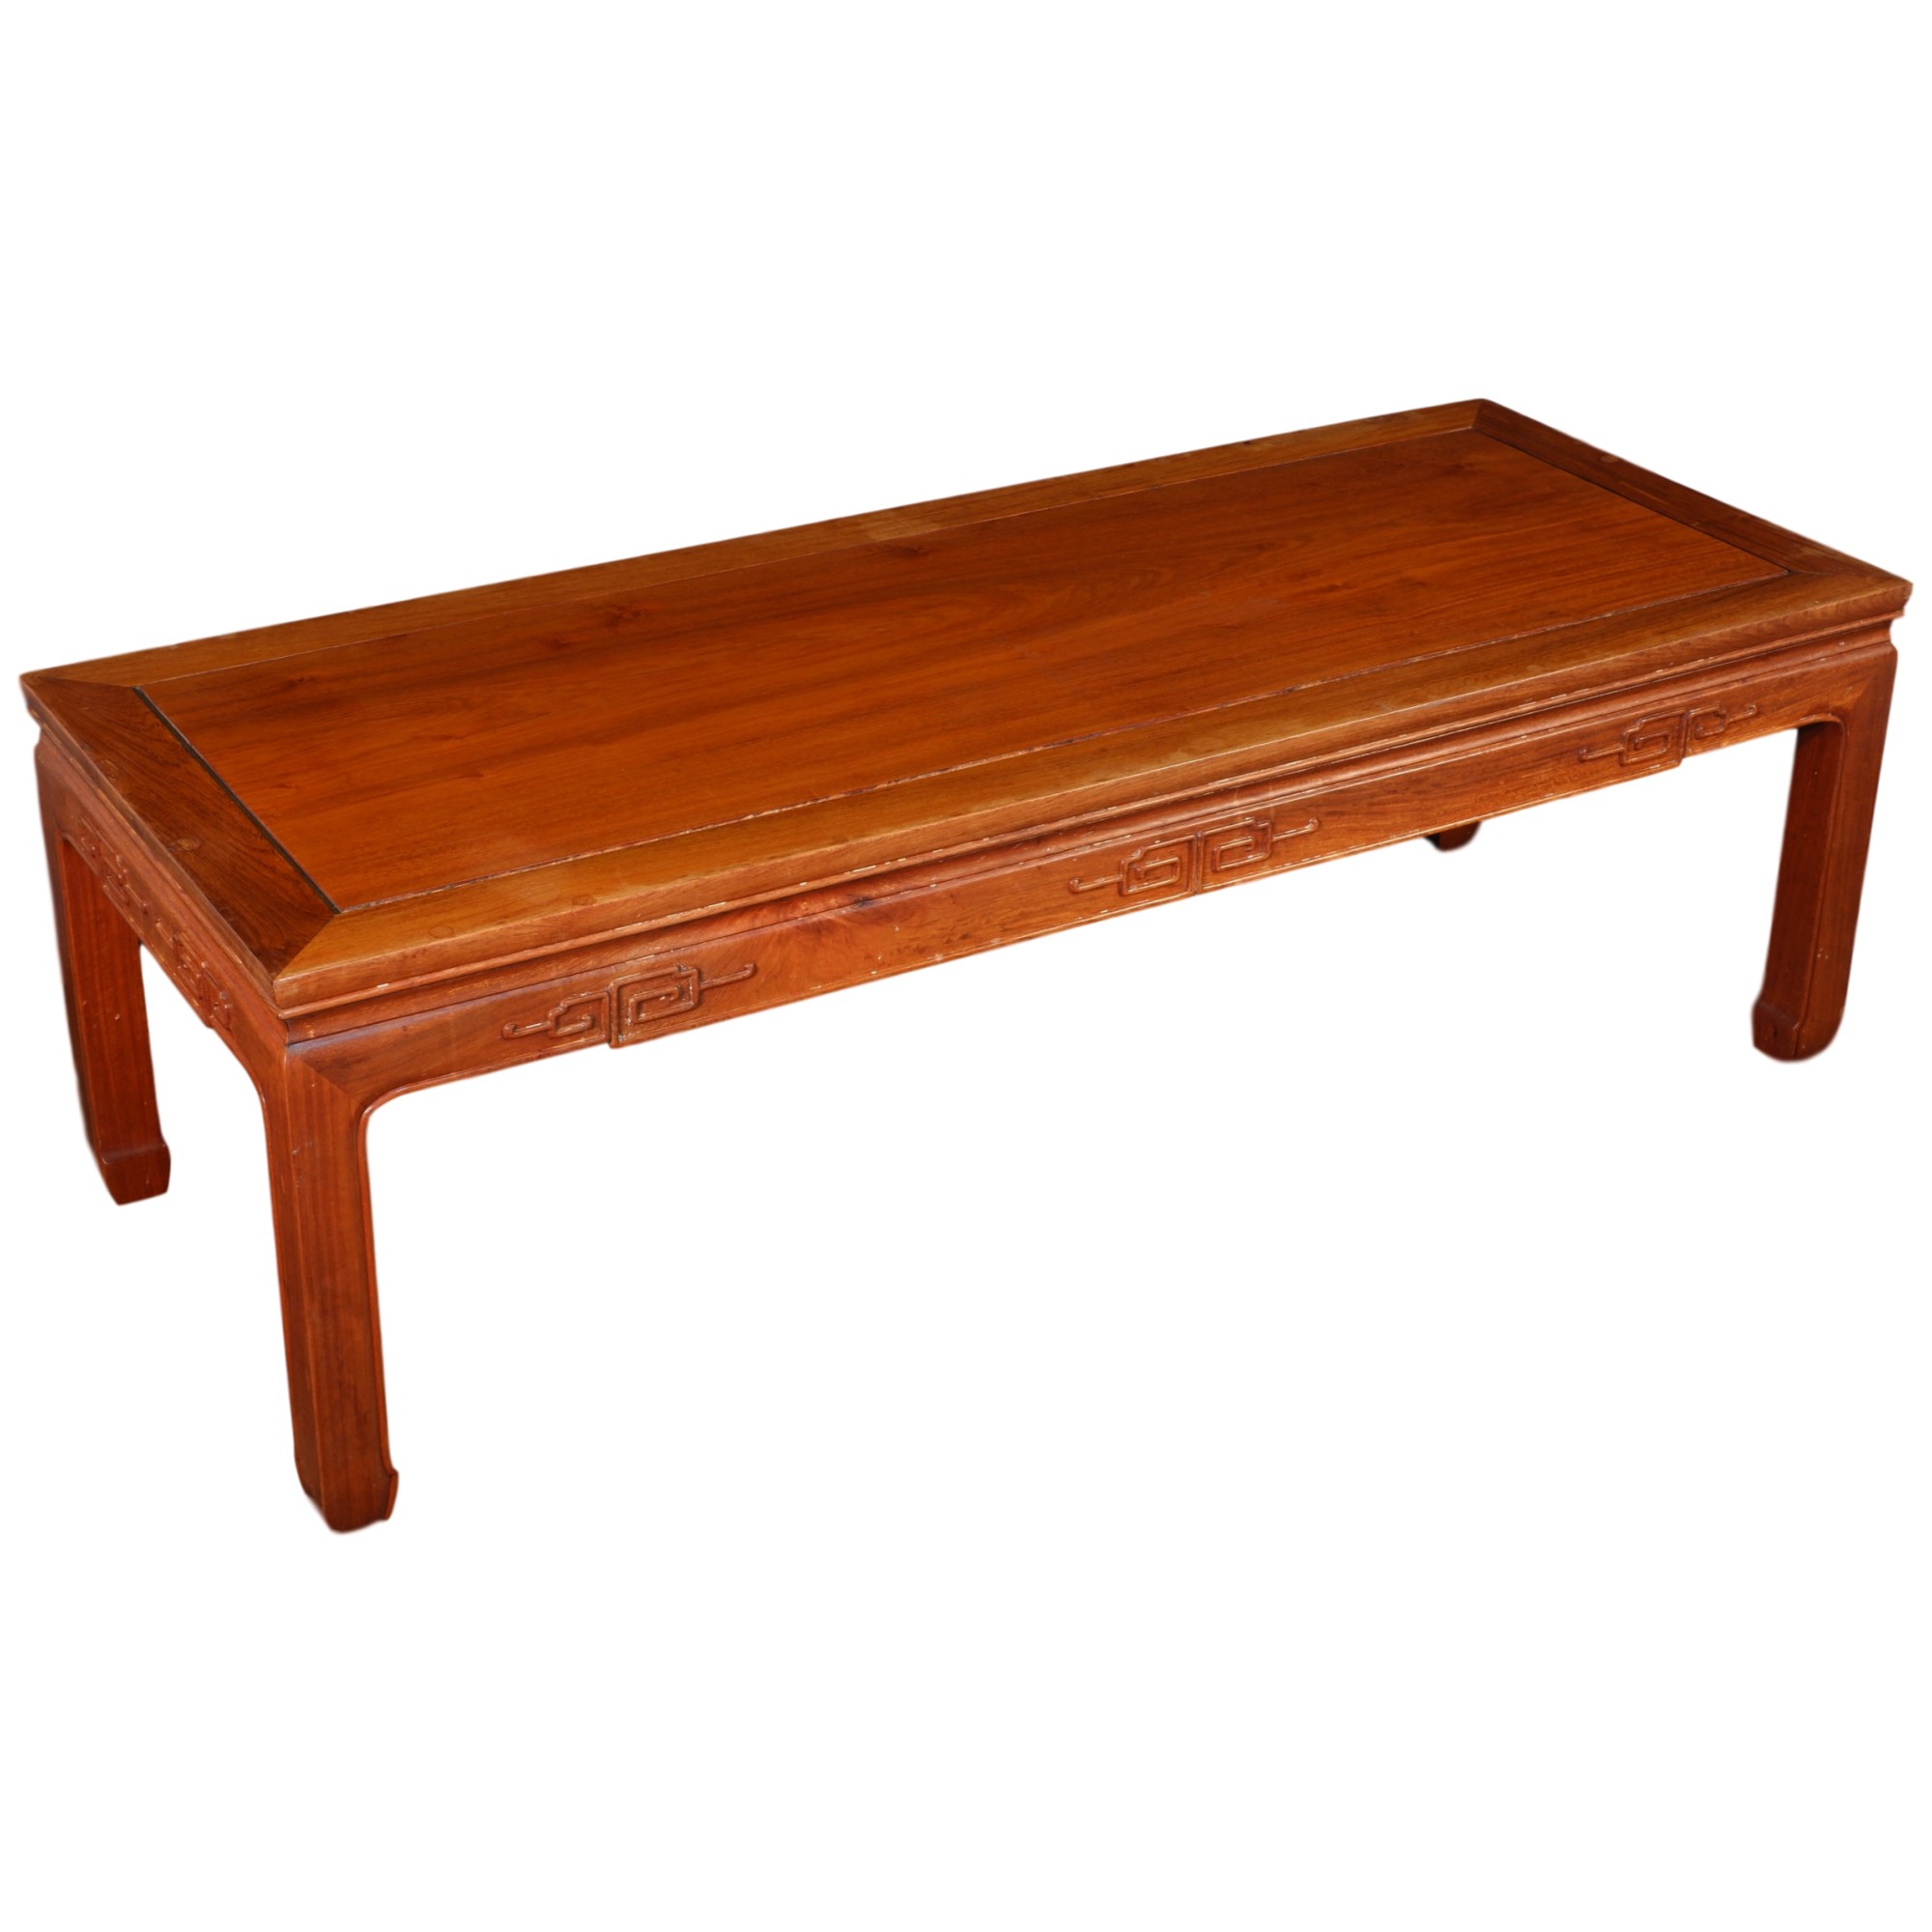 'Chinese Rosewood Kang Table Mid 20th Century'